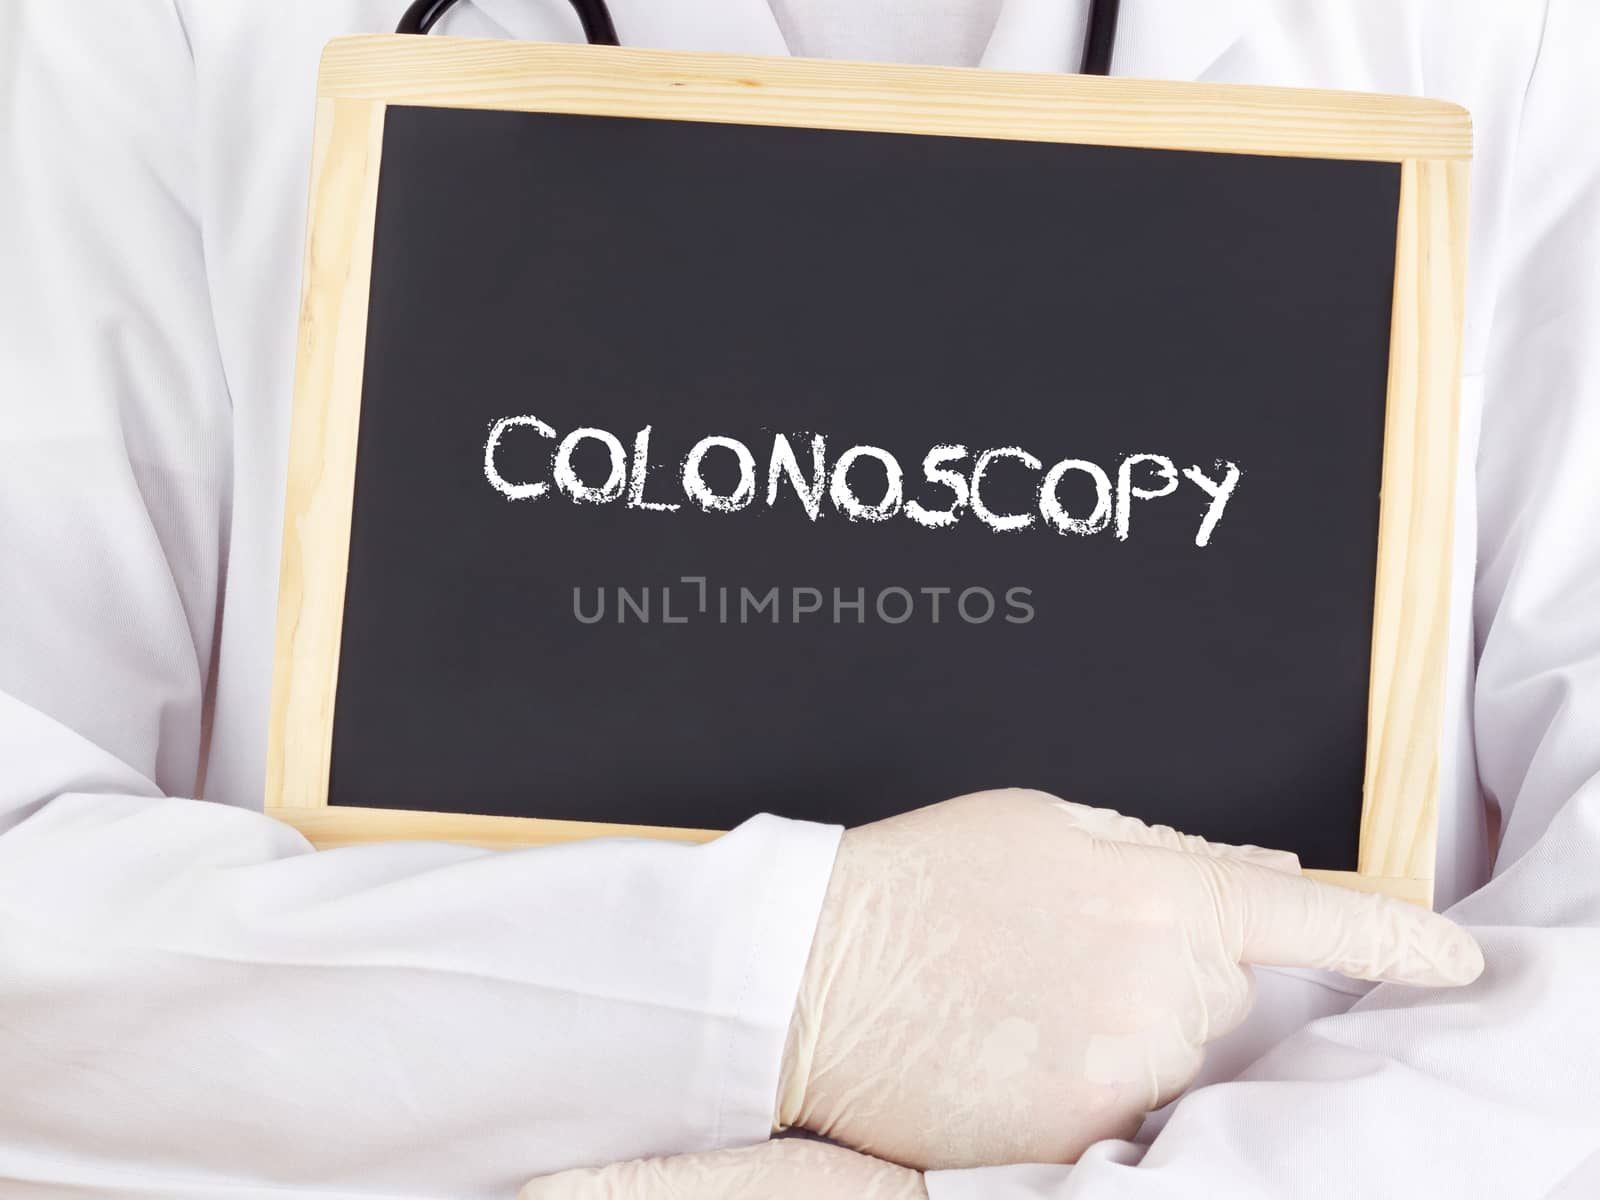 Doctor shows information on blackboard: colonoscopy by gwolters